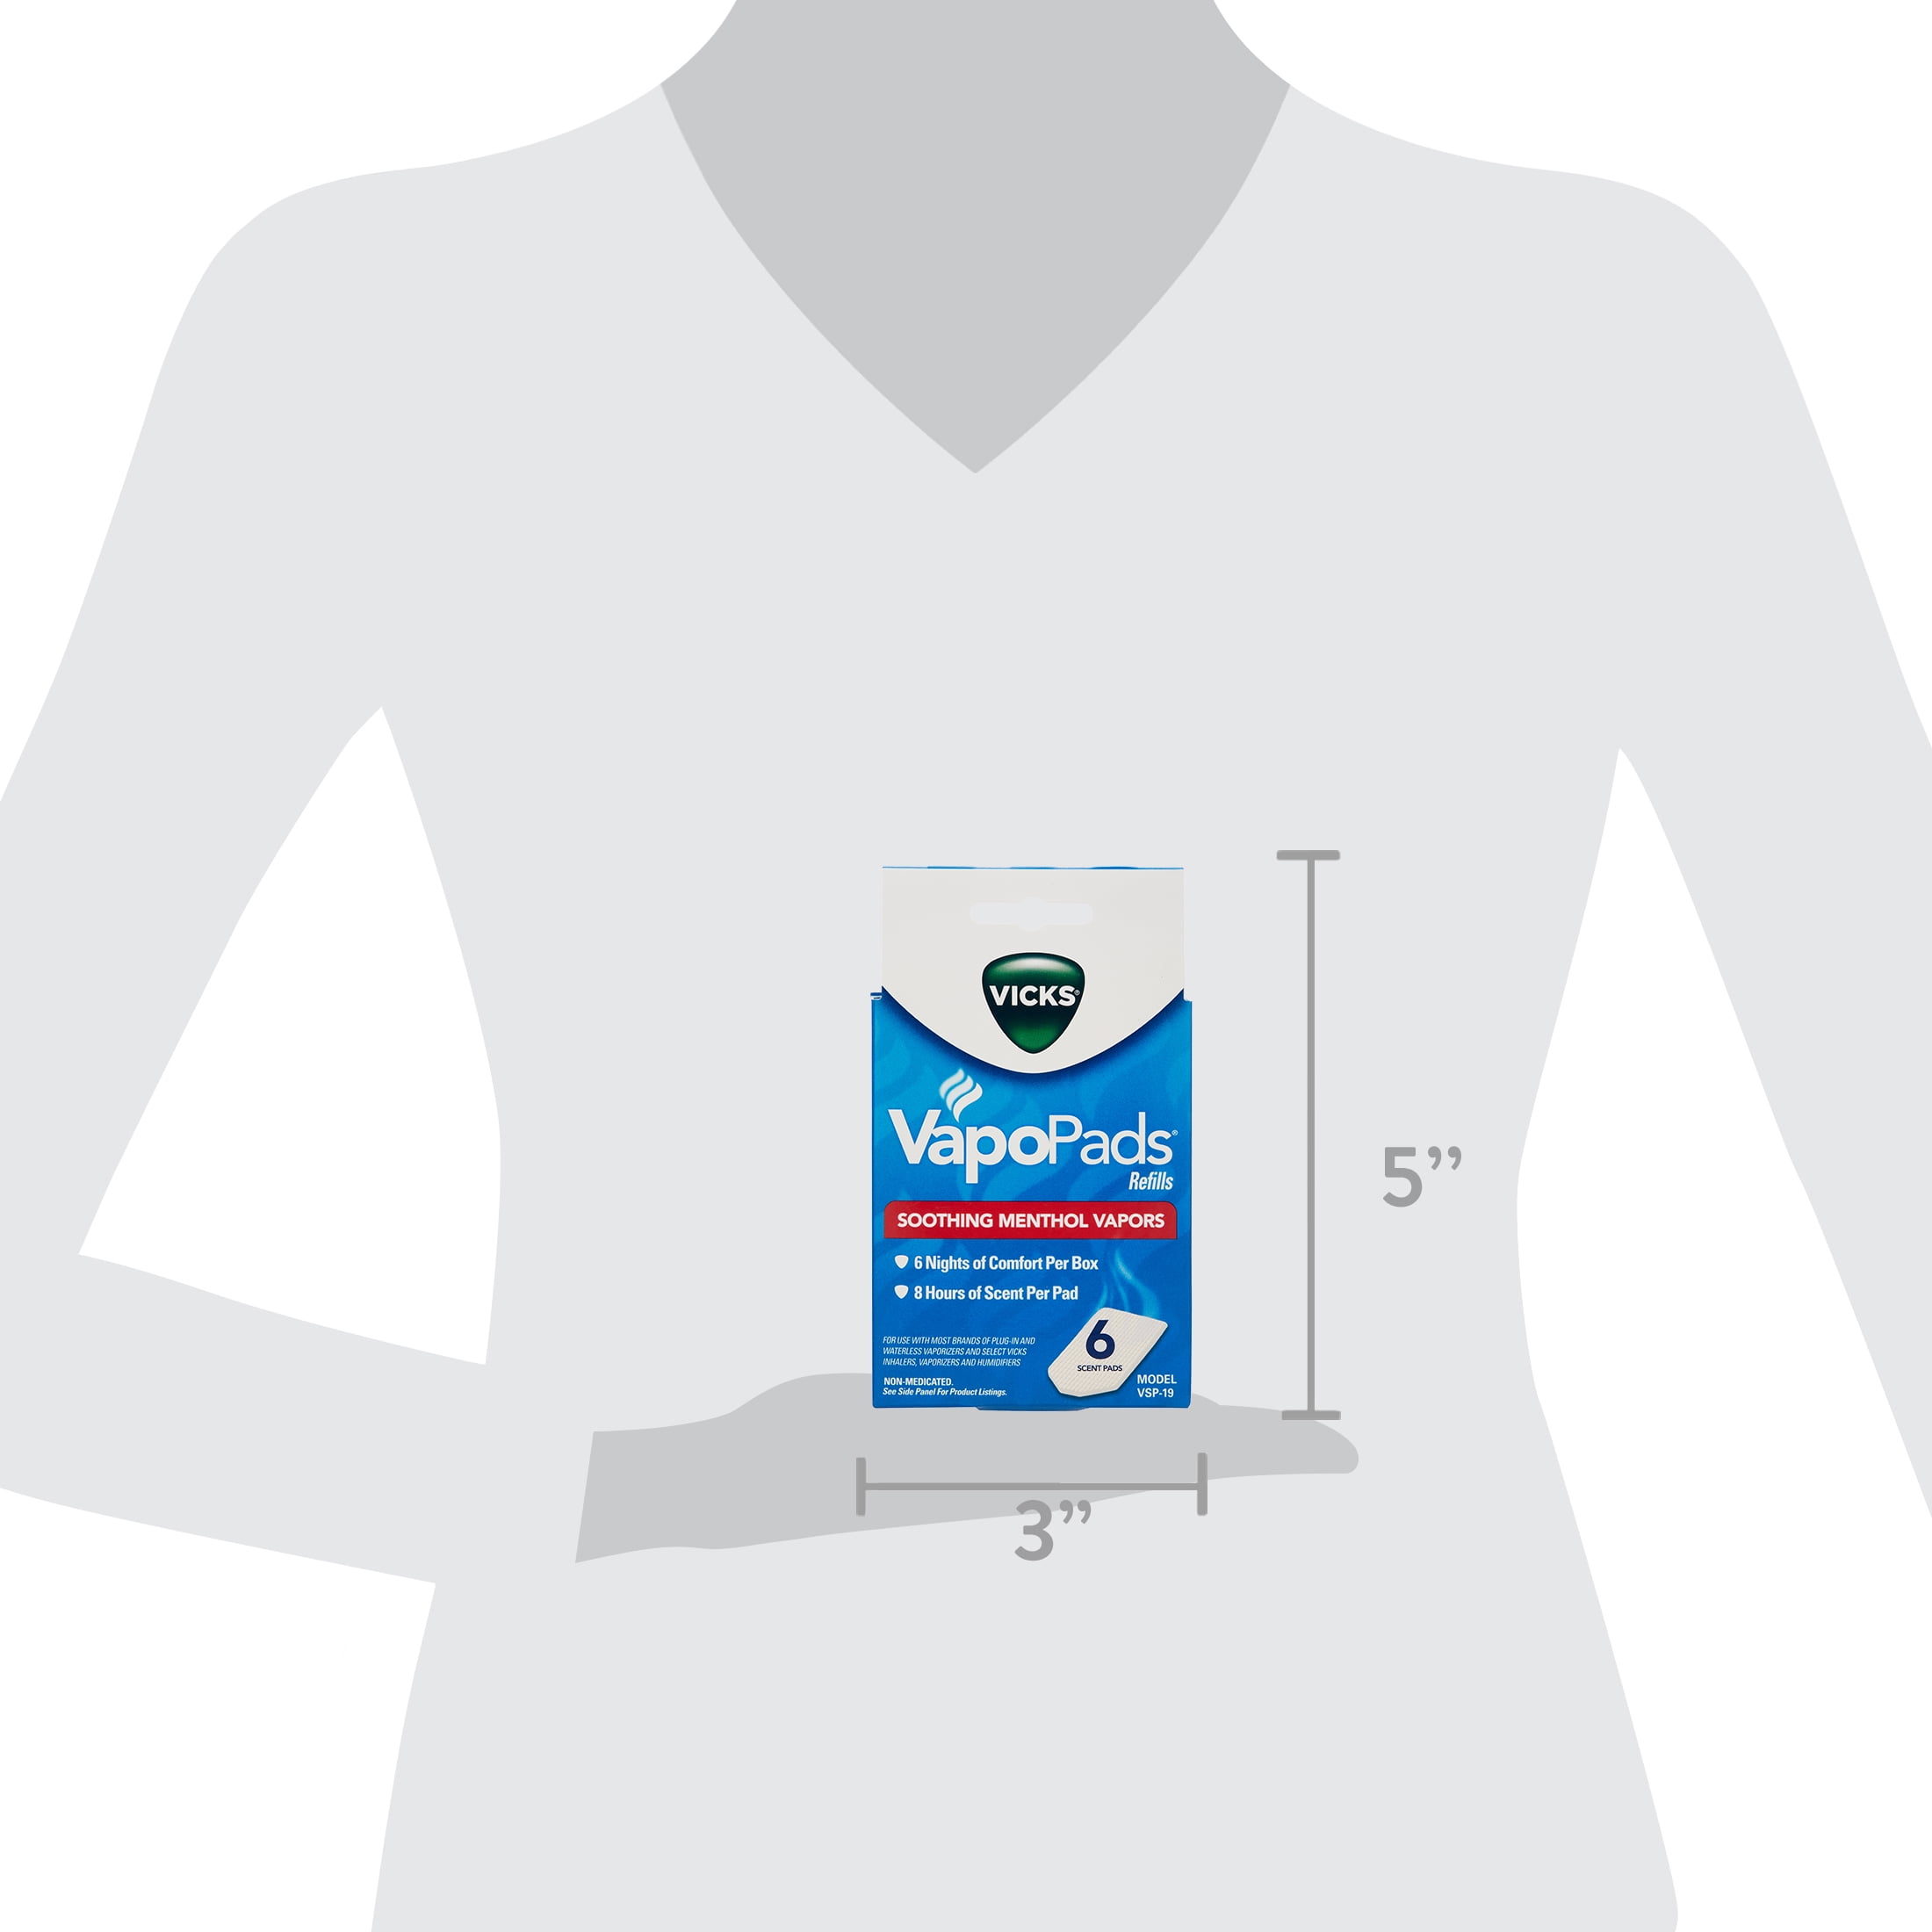 Vicks VapoPads Scent Pads, Soothing Menthol Vapors, Refills, Family Pack - 12 scent pads